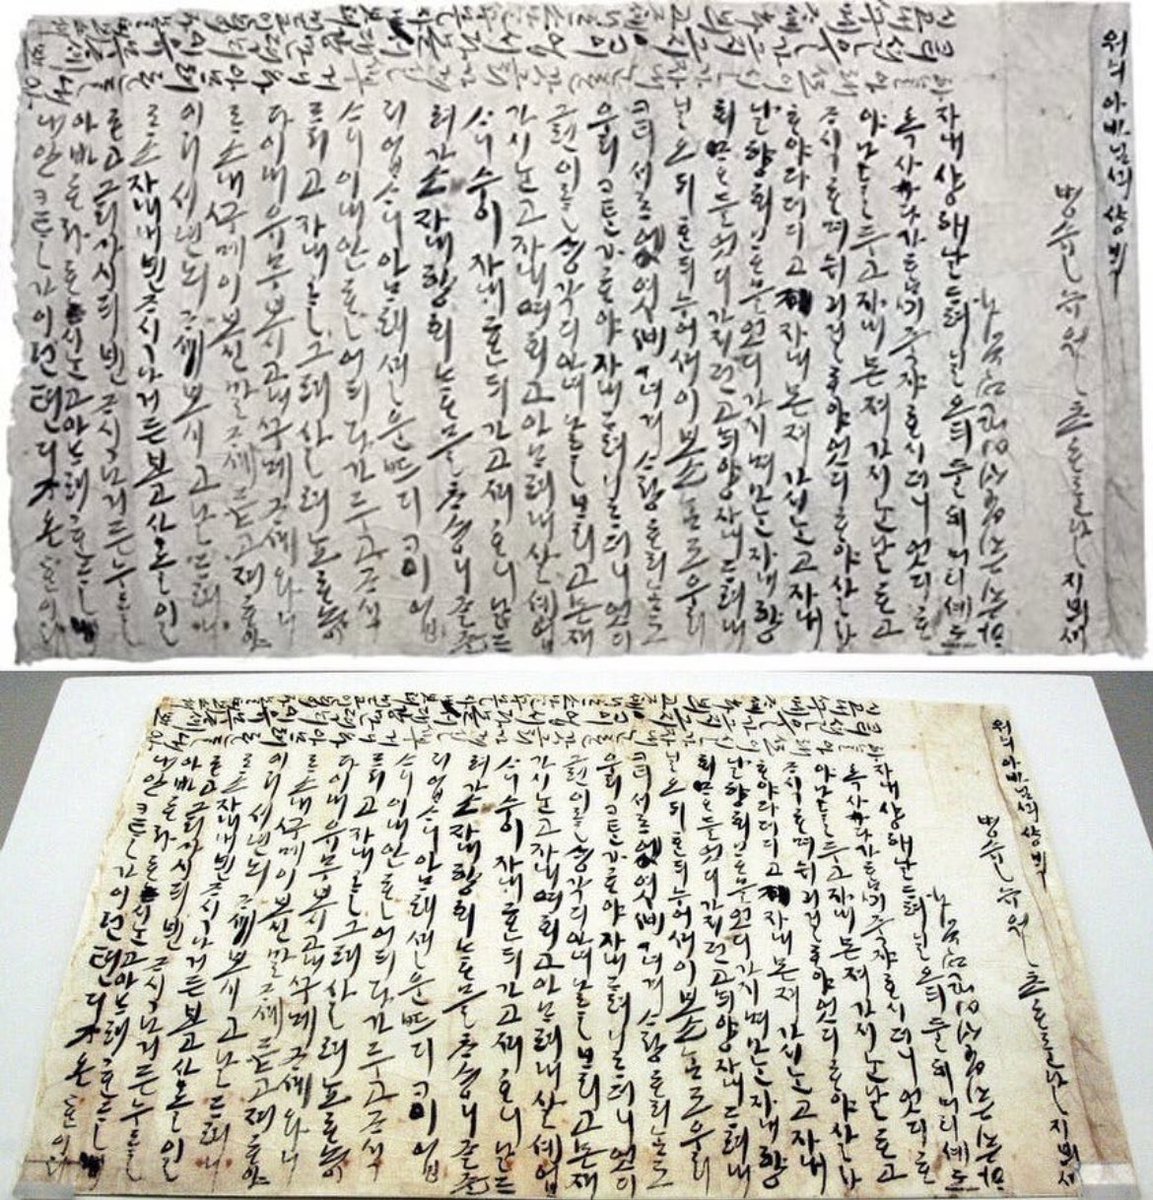 In 1998, archaeologists uncovered an ancient Korean tomb containing the mummified body of a 30-year-old man named Eung-Tae Lee. On his chest was a love letter from his pregnant wife to the father of her unborn child. The translation of the letter is as follows:

'To Won's Father